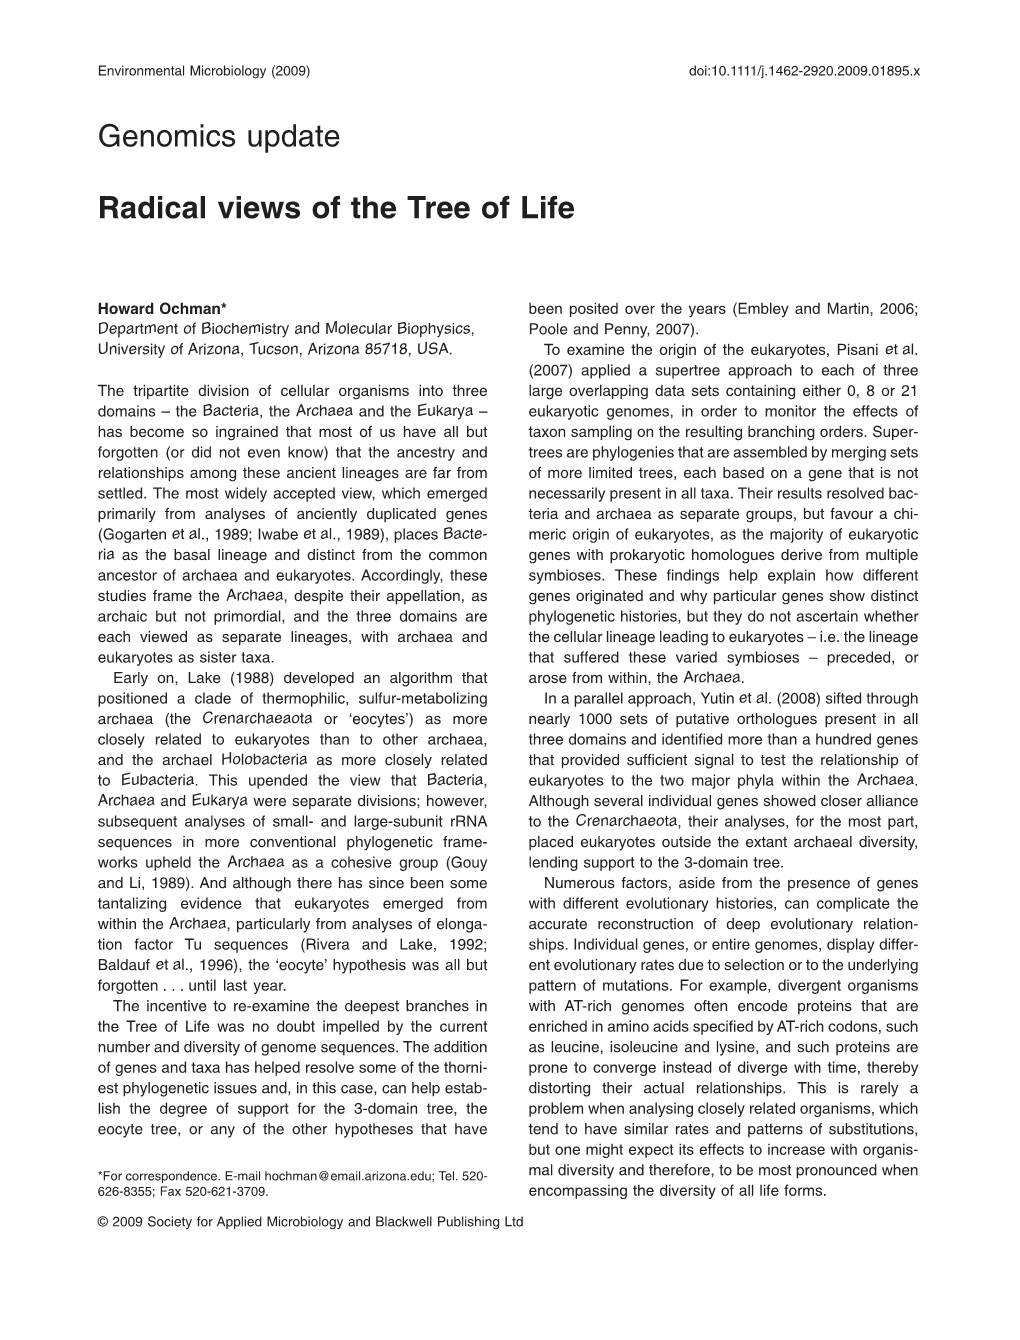 Radical Views of the Tree of Life